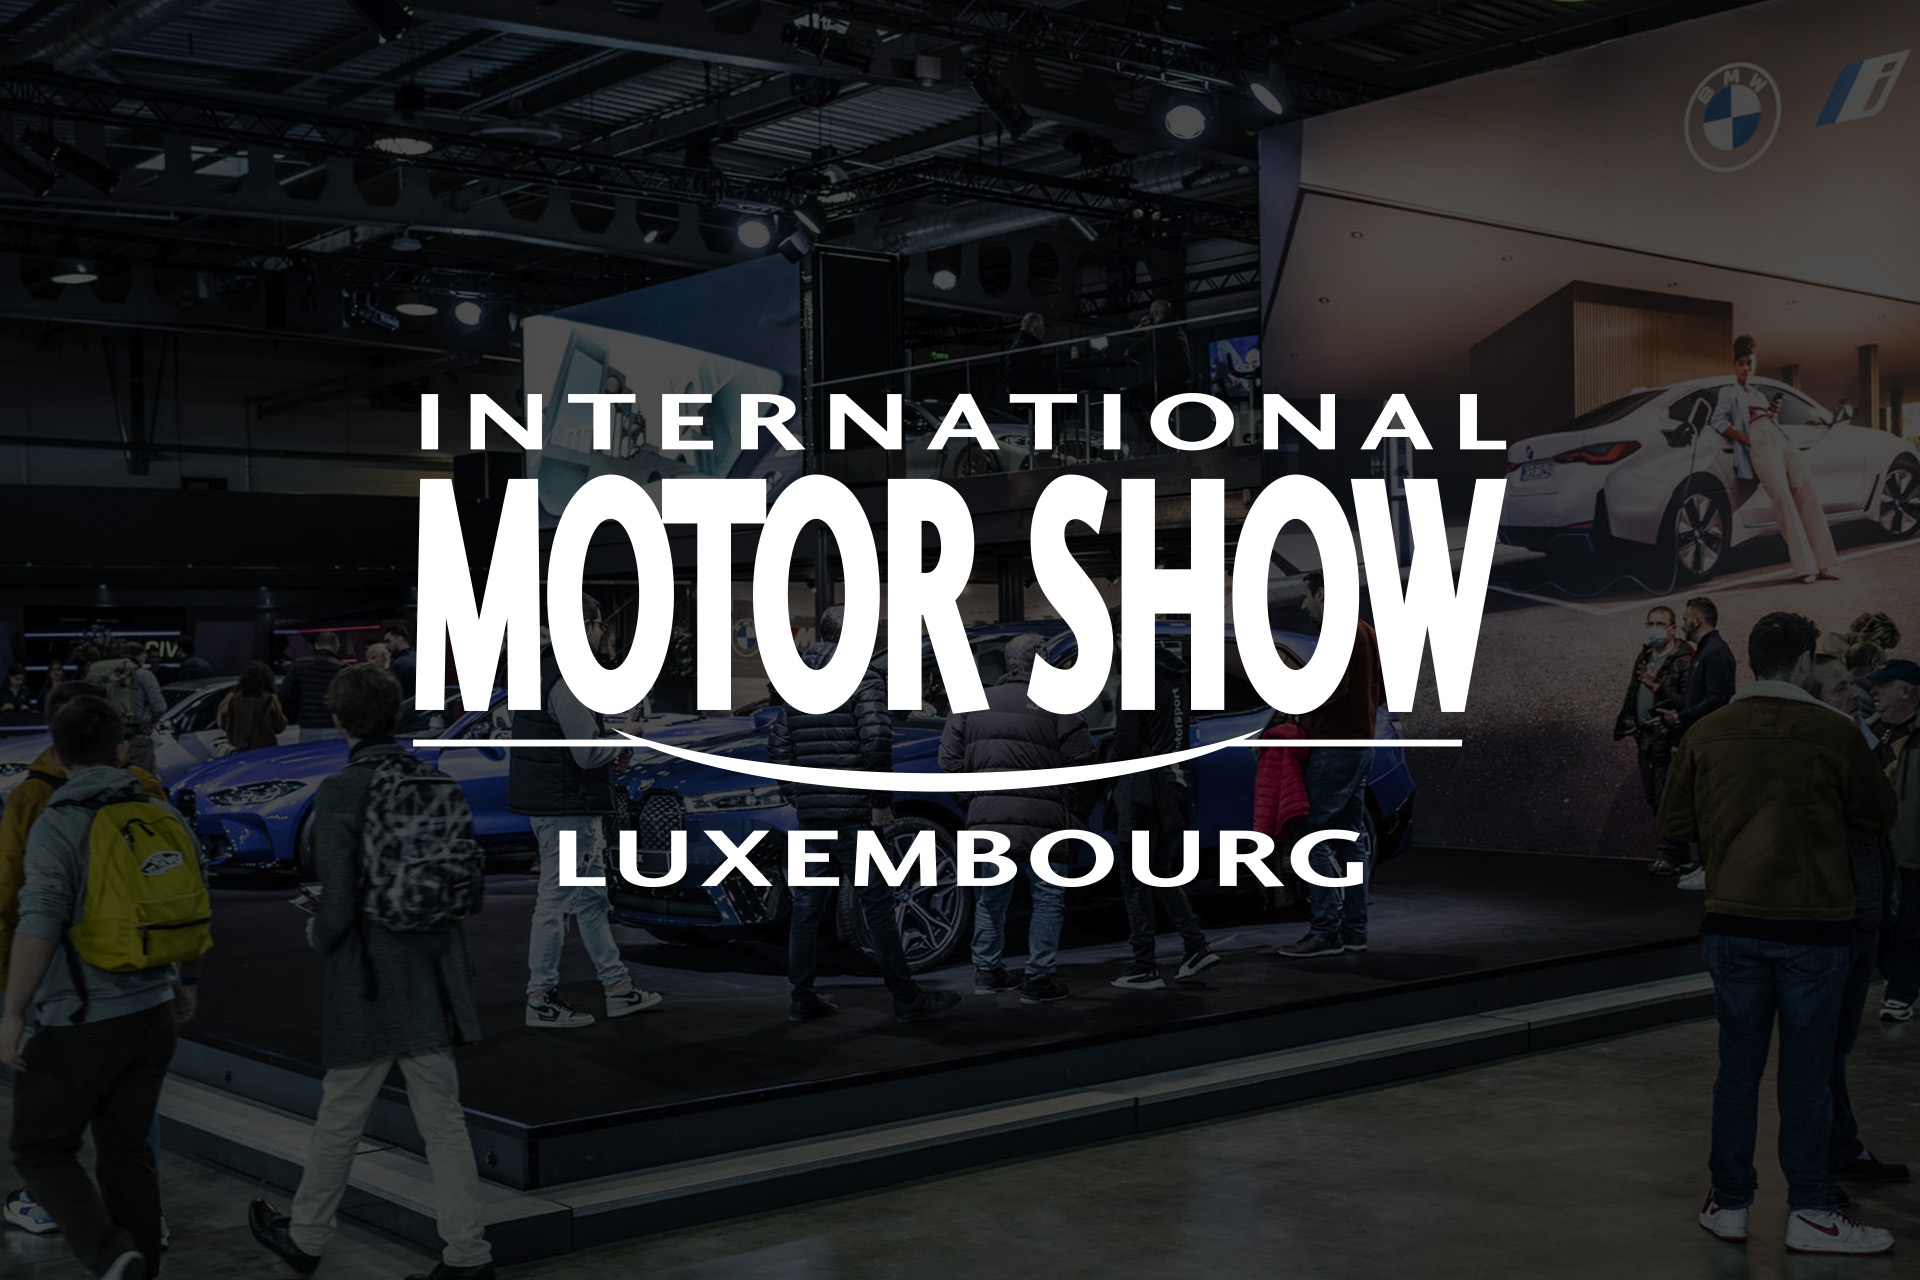 WOT at the Luxembourg Motor Show (IMS) image